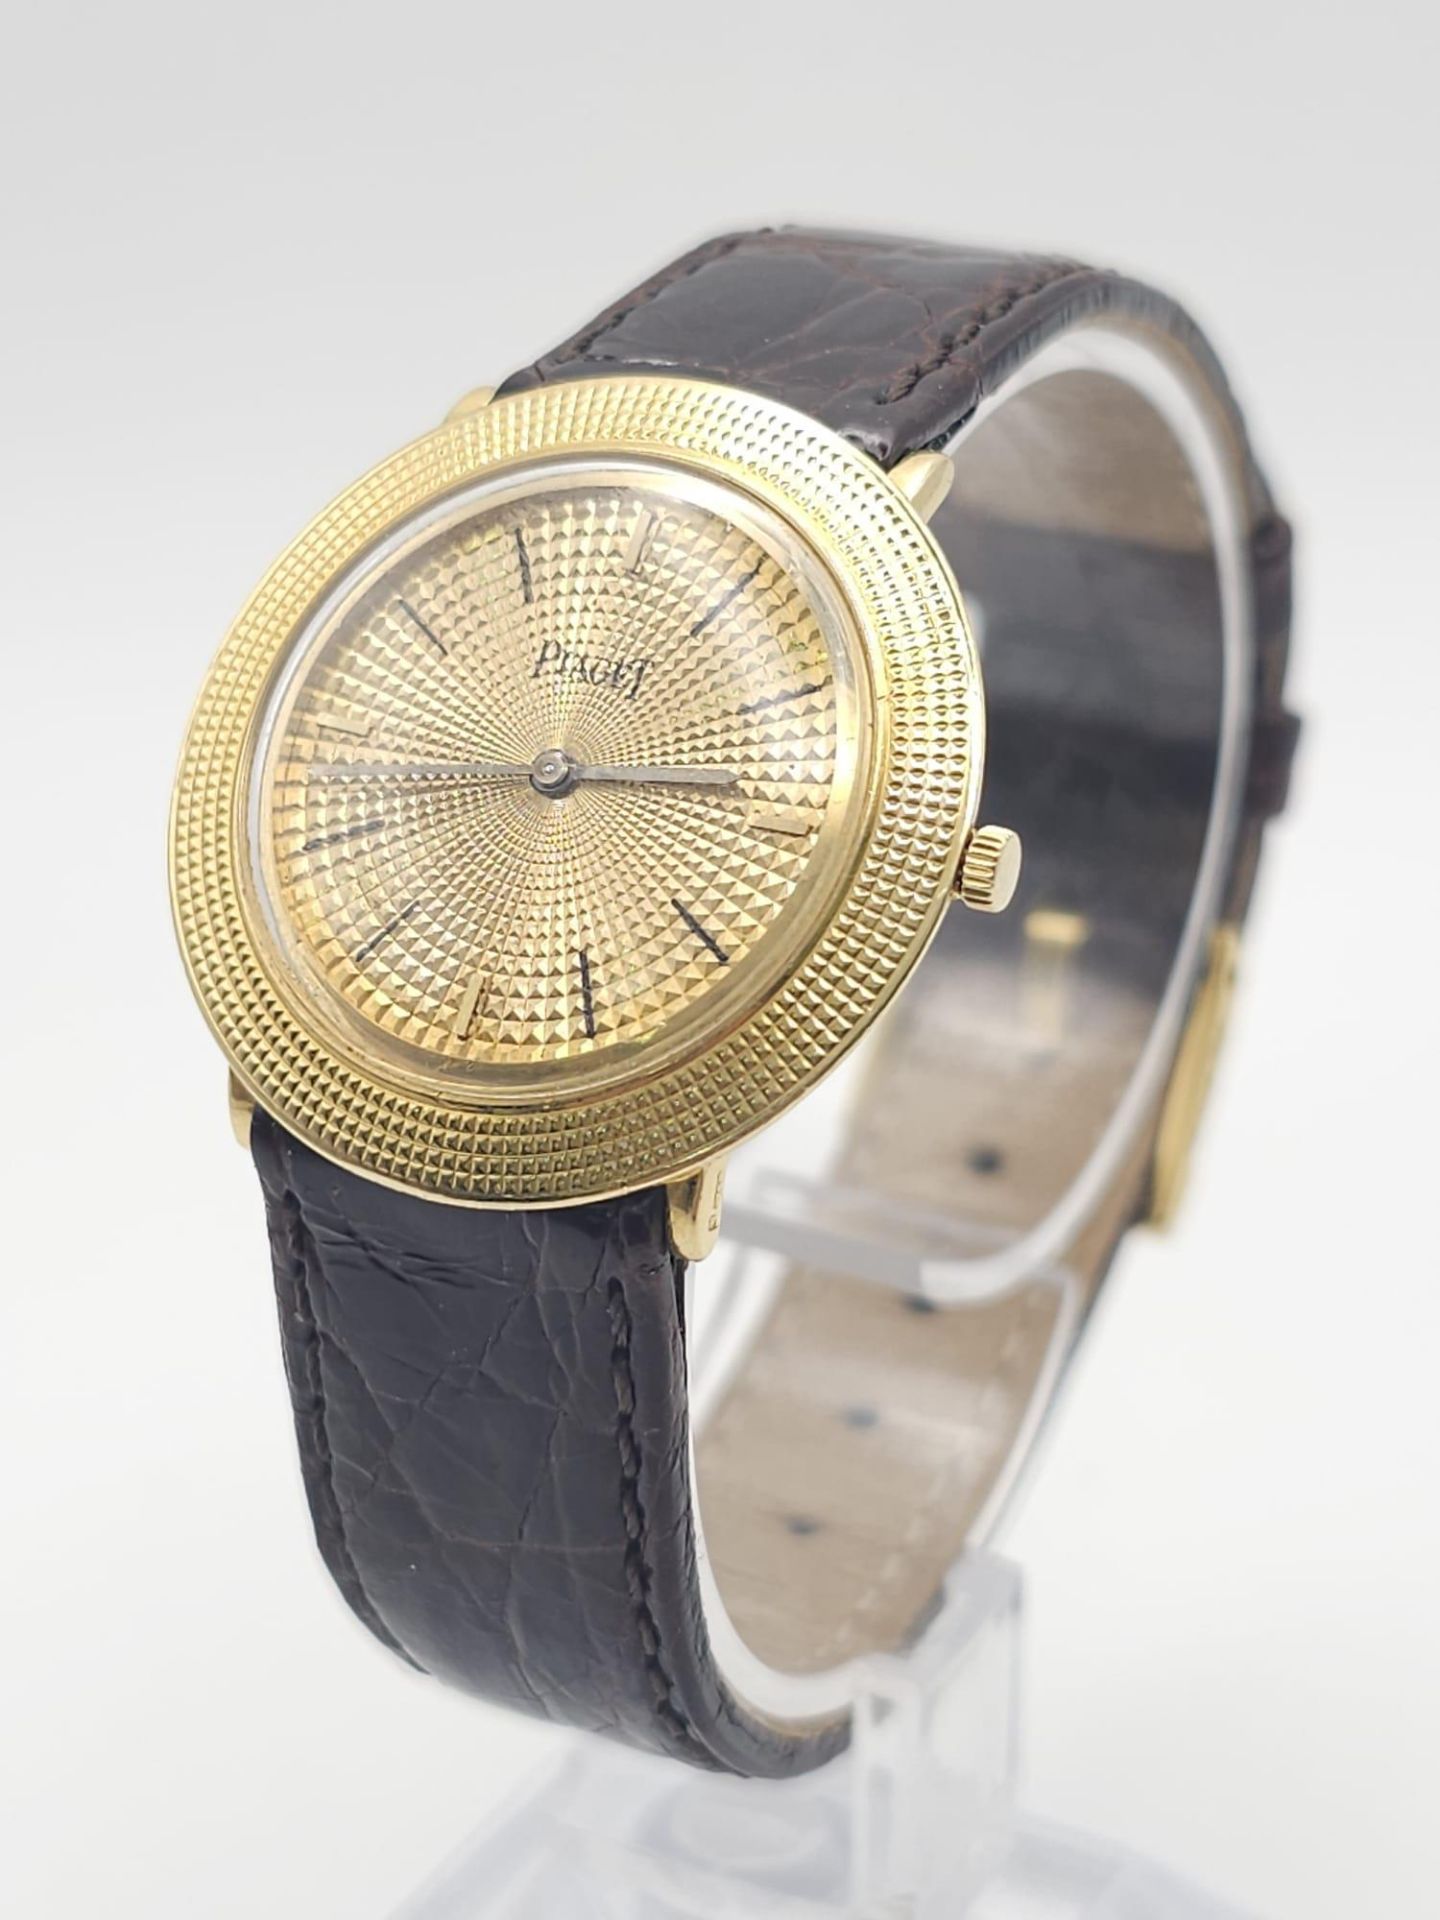 A Vintage 18K Gold Piaget Gents Watch with Hypnotic Dial. Brown crocodile strap. 18k gold case -